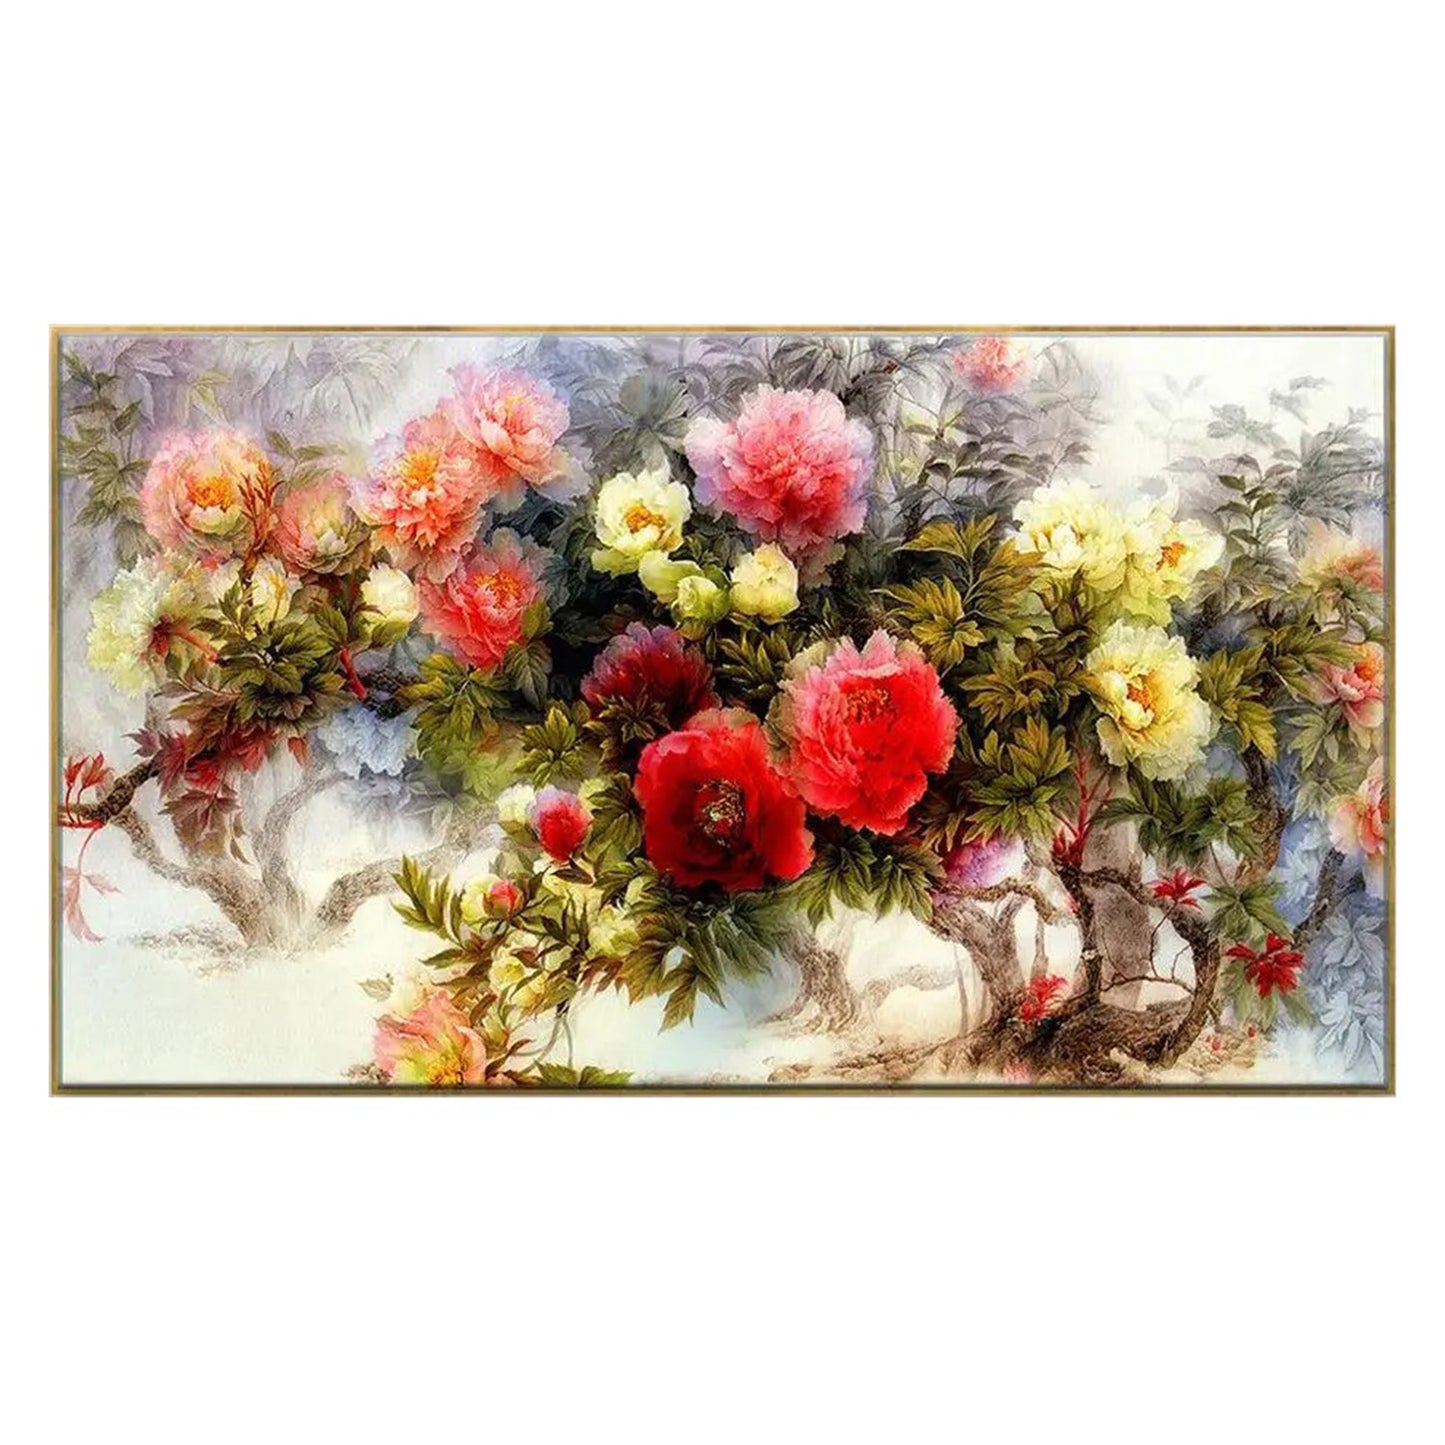 Vibrant Floral Bouquet Wall Art Painting